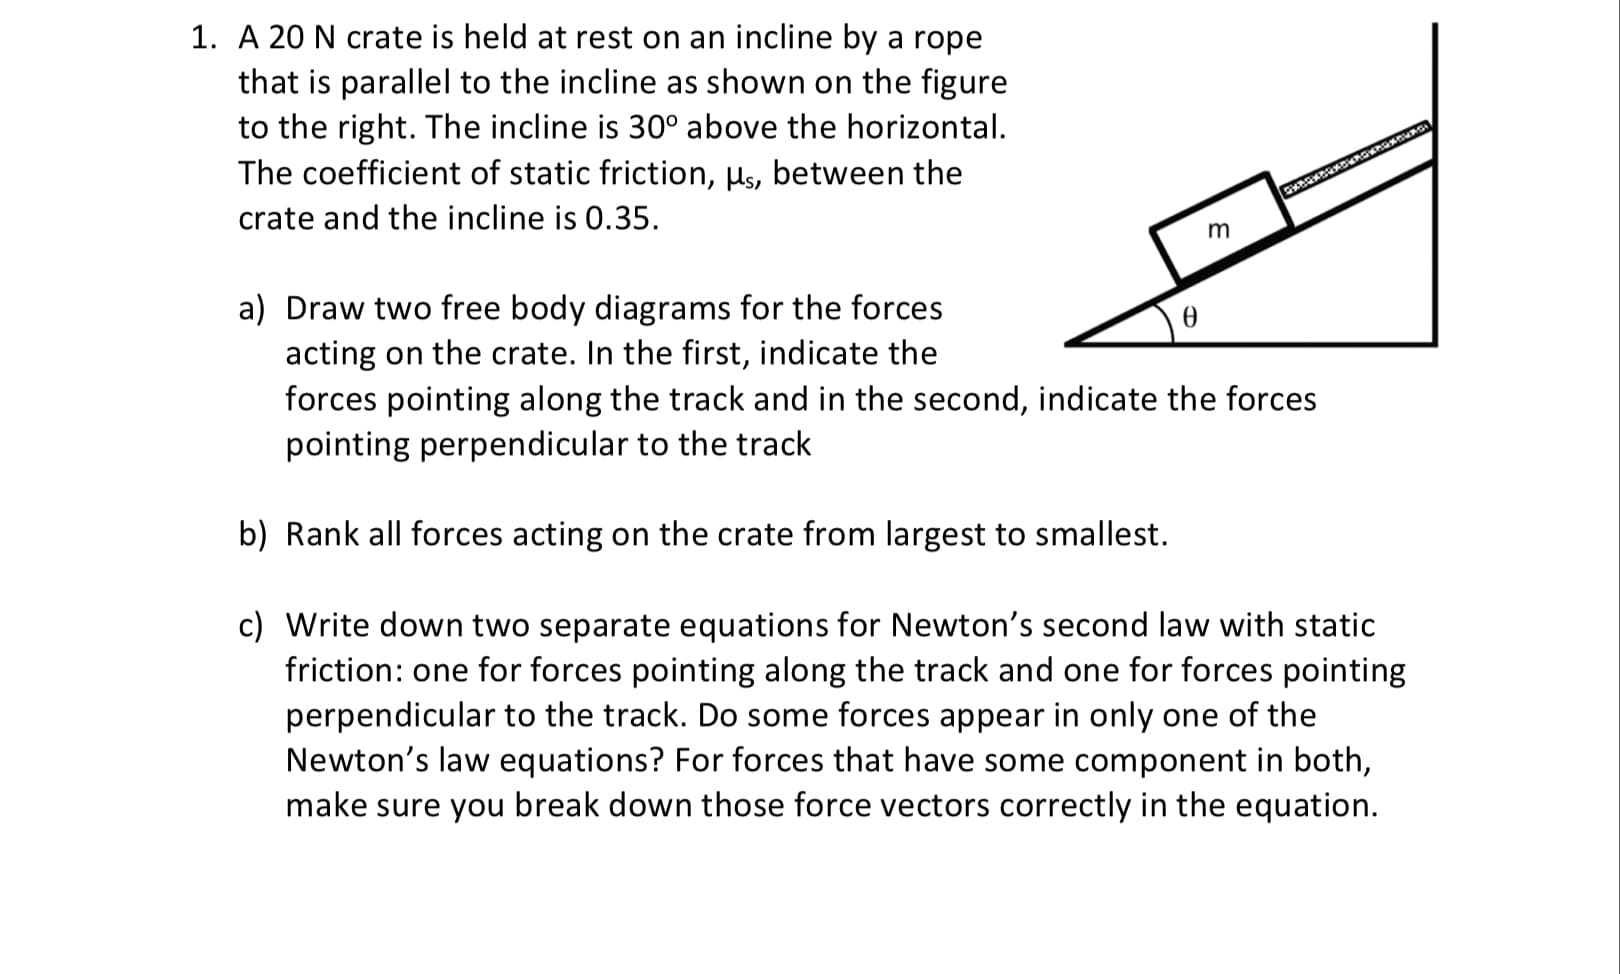 A 20 N crate is held at rest on an incline by a rope
that is parallel to the incline as shown on the figure
to the right. The incline is 30° above the horizontal.
The coefficient of static friction, Hs, between the
crate and the incline is 0.35.
m
a) Draw two free body diagrams for the forces
acting on the crate. In the first, indicate the
forces pointing along the track and in the second, indicate the forces
pointing perpendicular to the track
b) Rank all forces acting on the crate from largest to smallest.
c) Write down two separate equations for Newton's second law with static
friction: one for forces pointing along the track and one for forces pointing
perpendicular to the track. Do some forces appear in only one of the
Newton's law equations? For forces that have some component in both,
make sure you break down those force vectors correctly in the equation.
